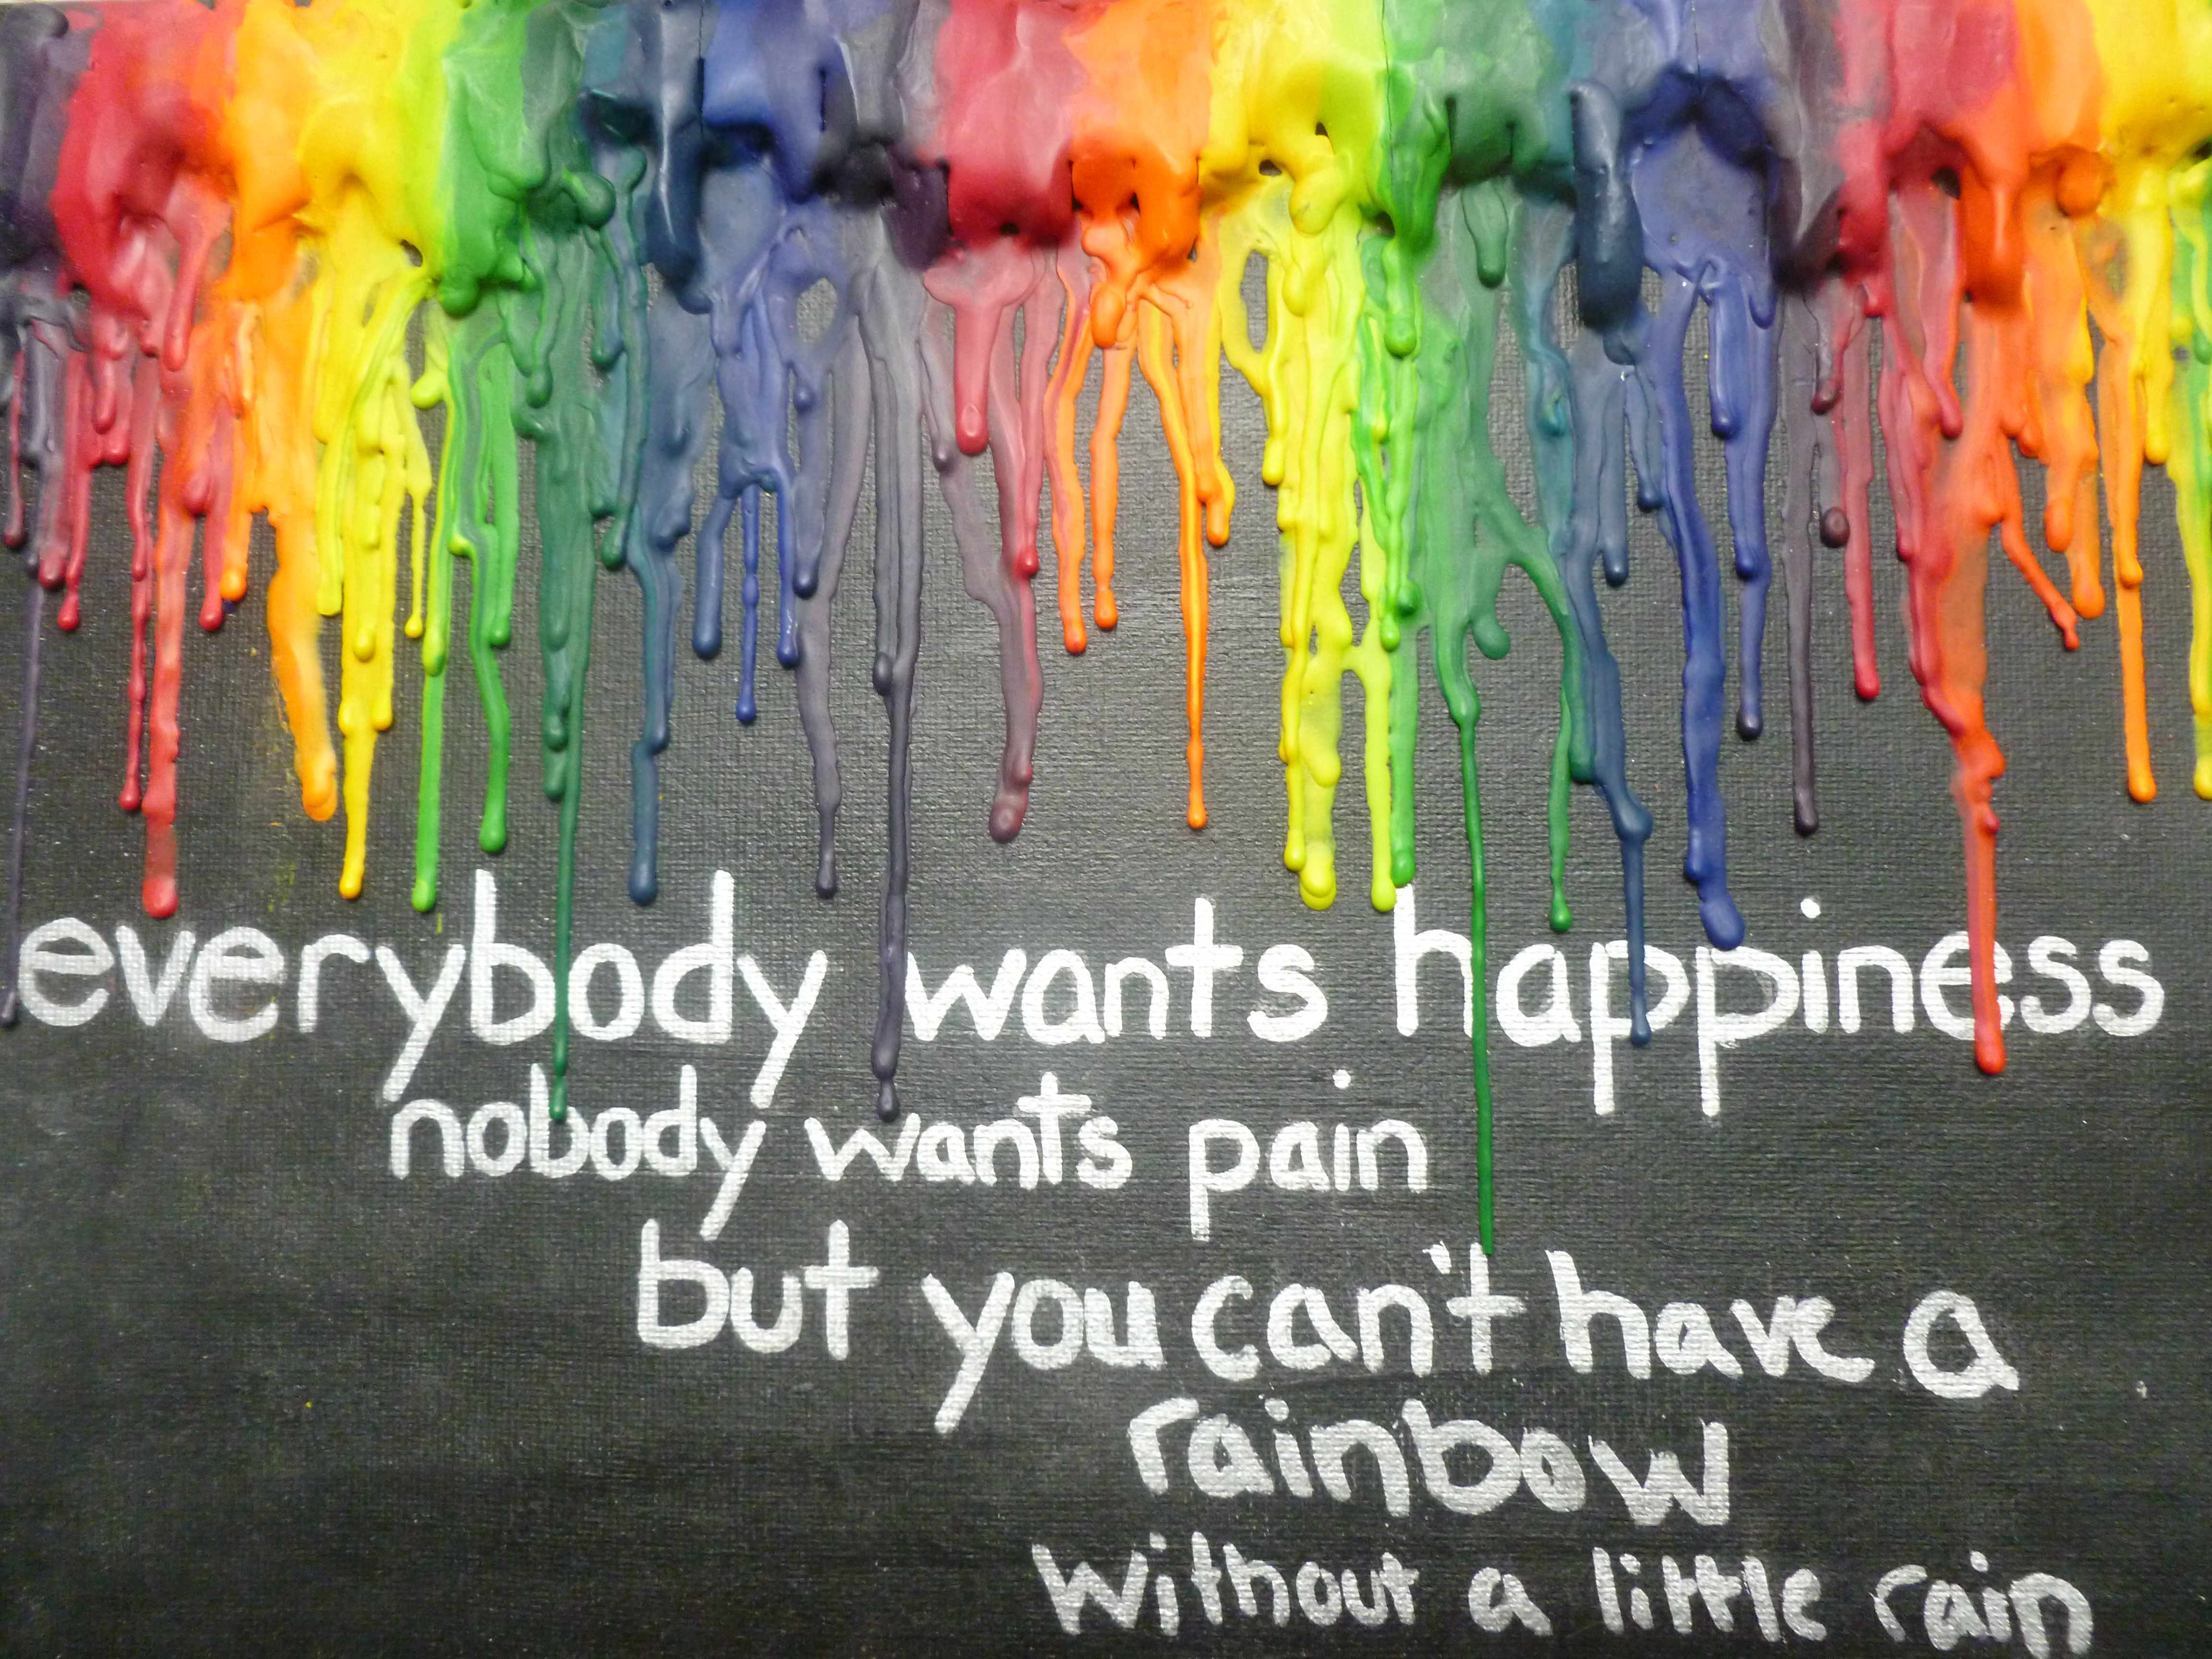 Everybody wanted to know. There is no Rainbow without Rain. You can't have a Rainbow without a little Rain. Everybody want your body. I just want to be Happy.